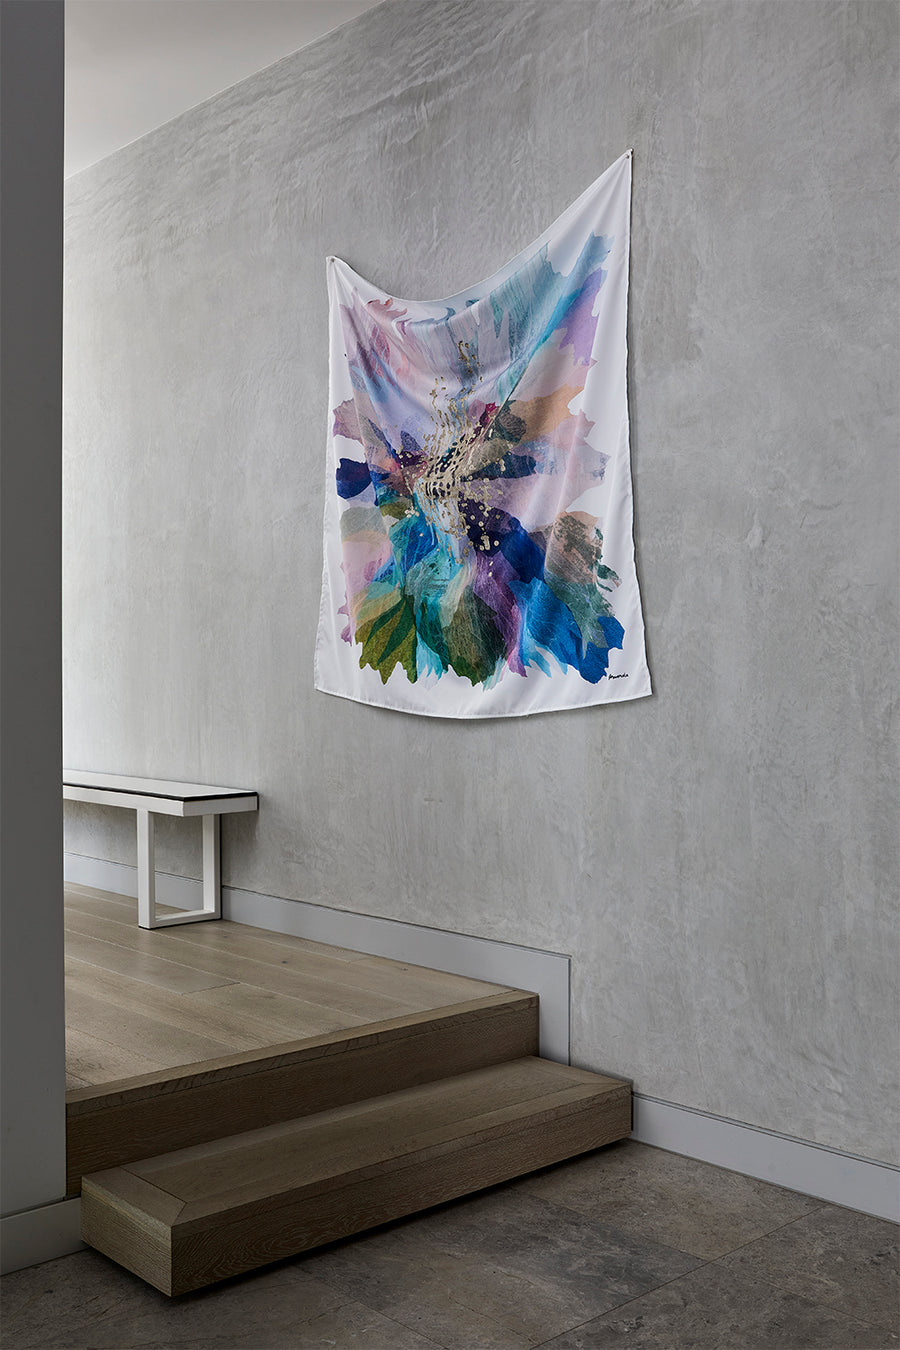 Antoinette Ferwerda | Wisteria Fabric Art hanging on a wall above stairs